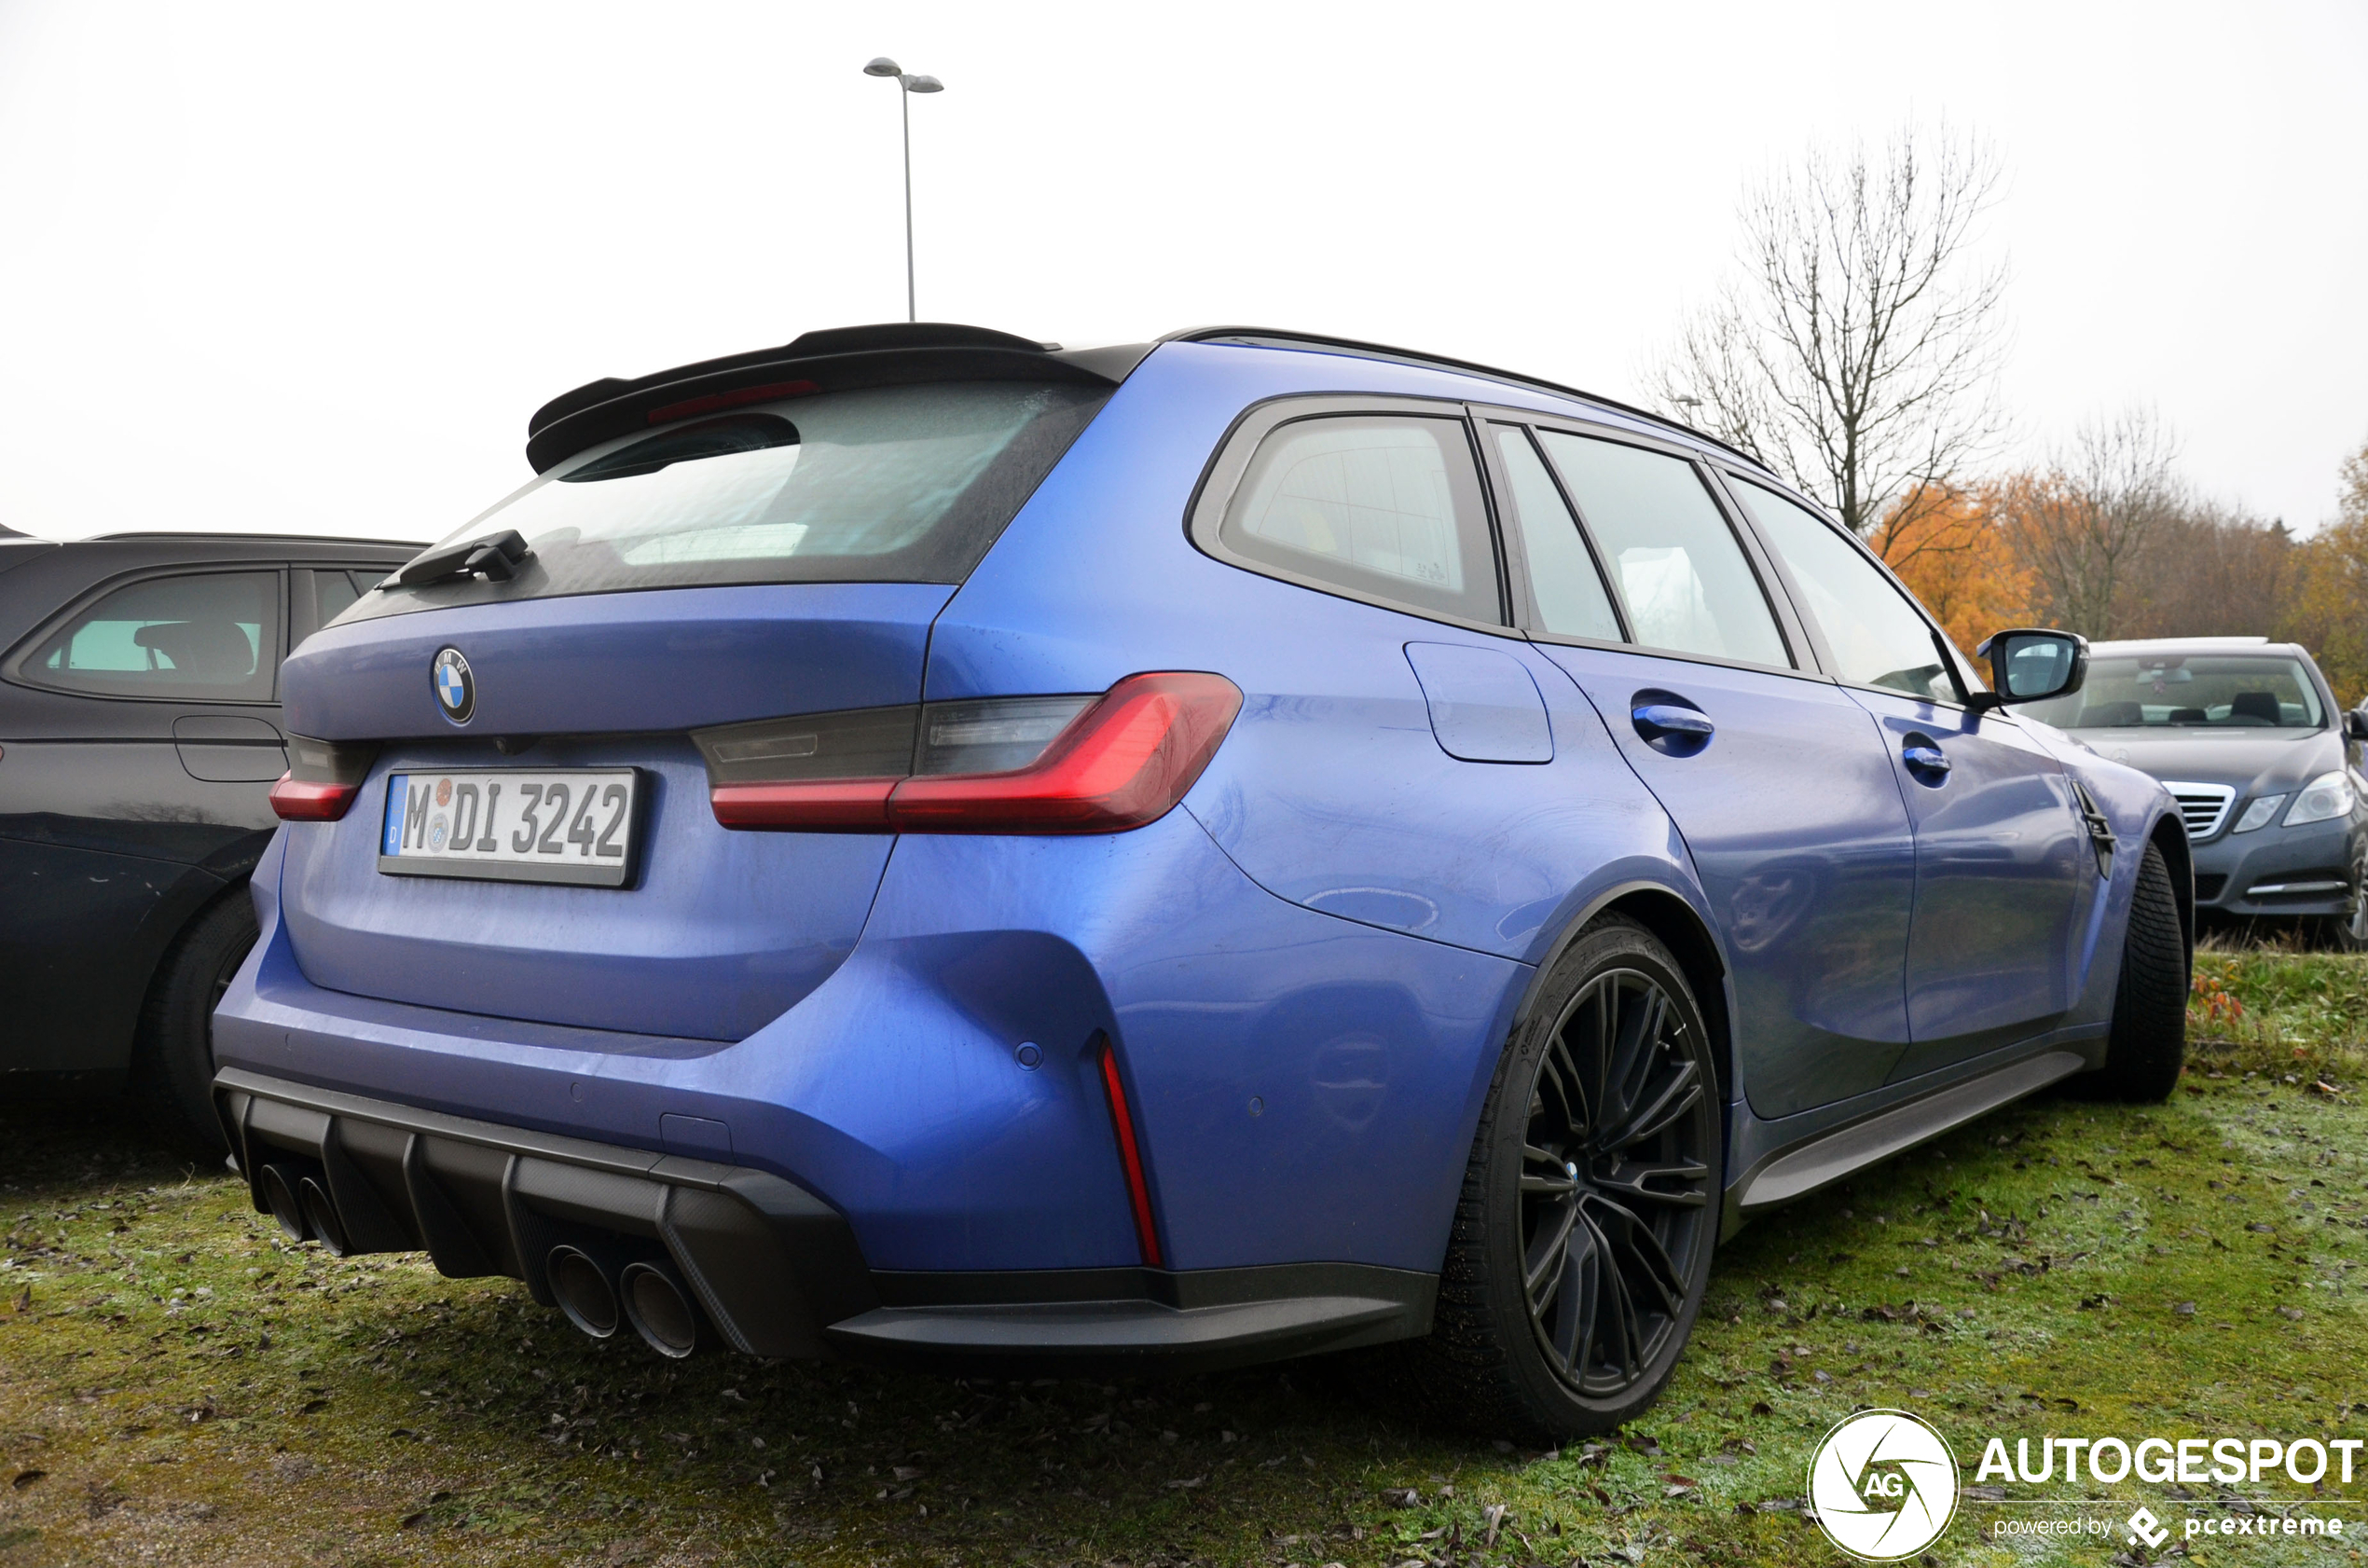 BMW M3 Touring finally spotted on the streets